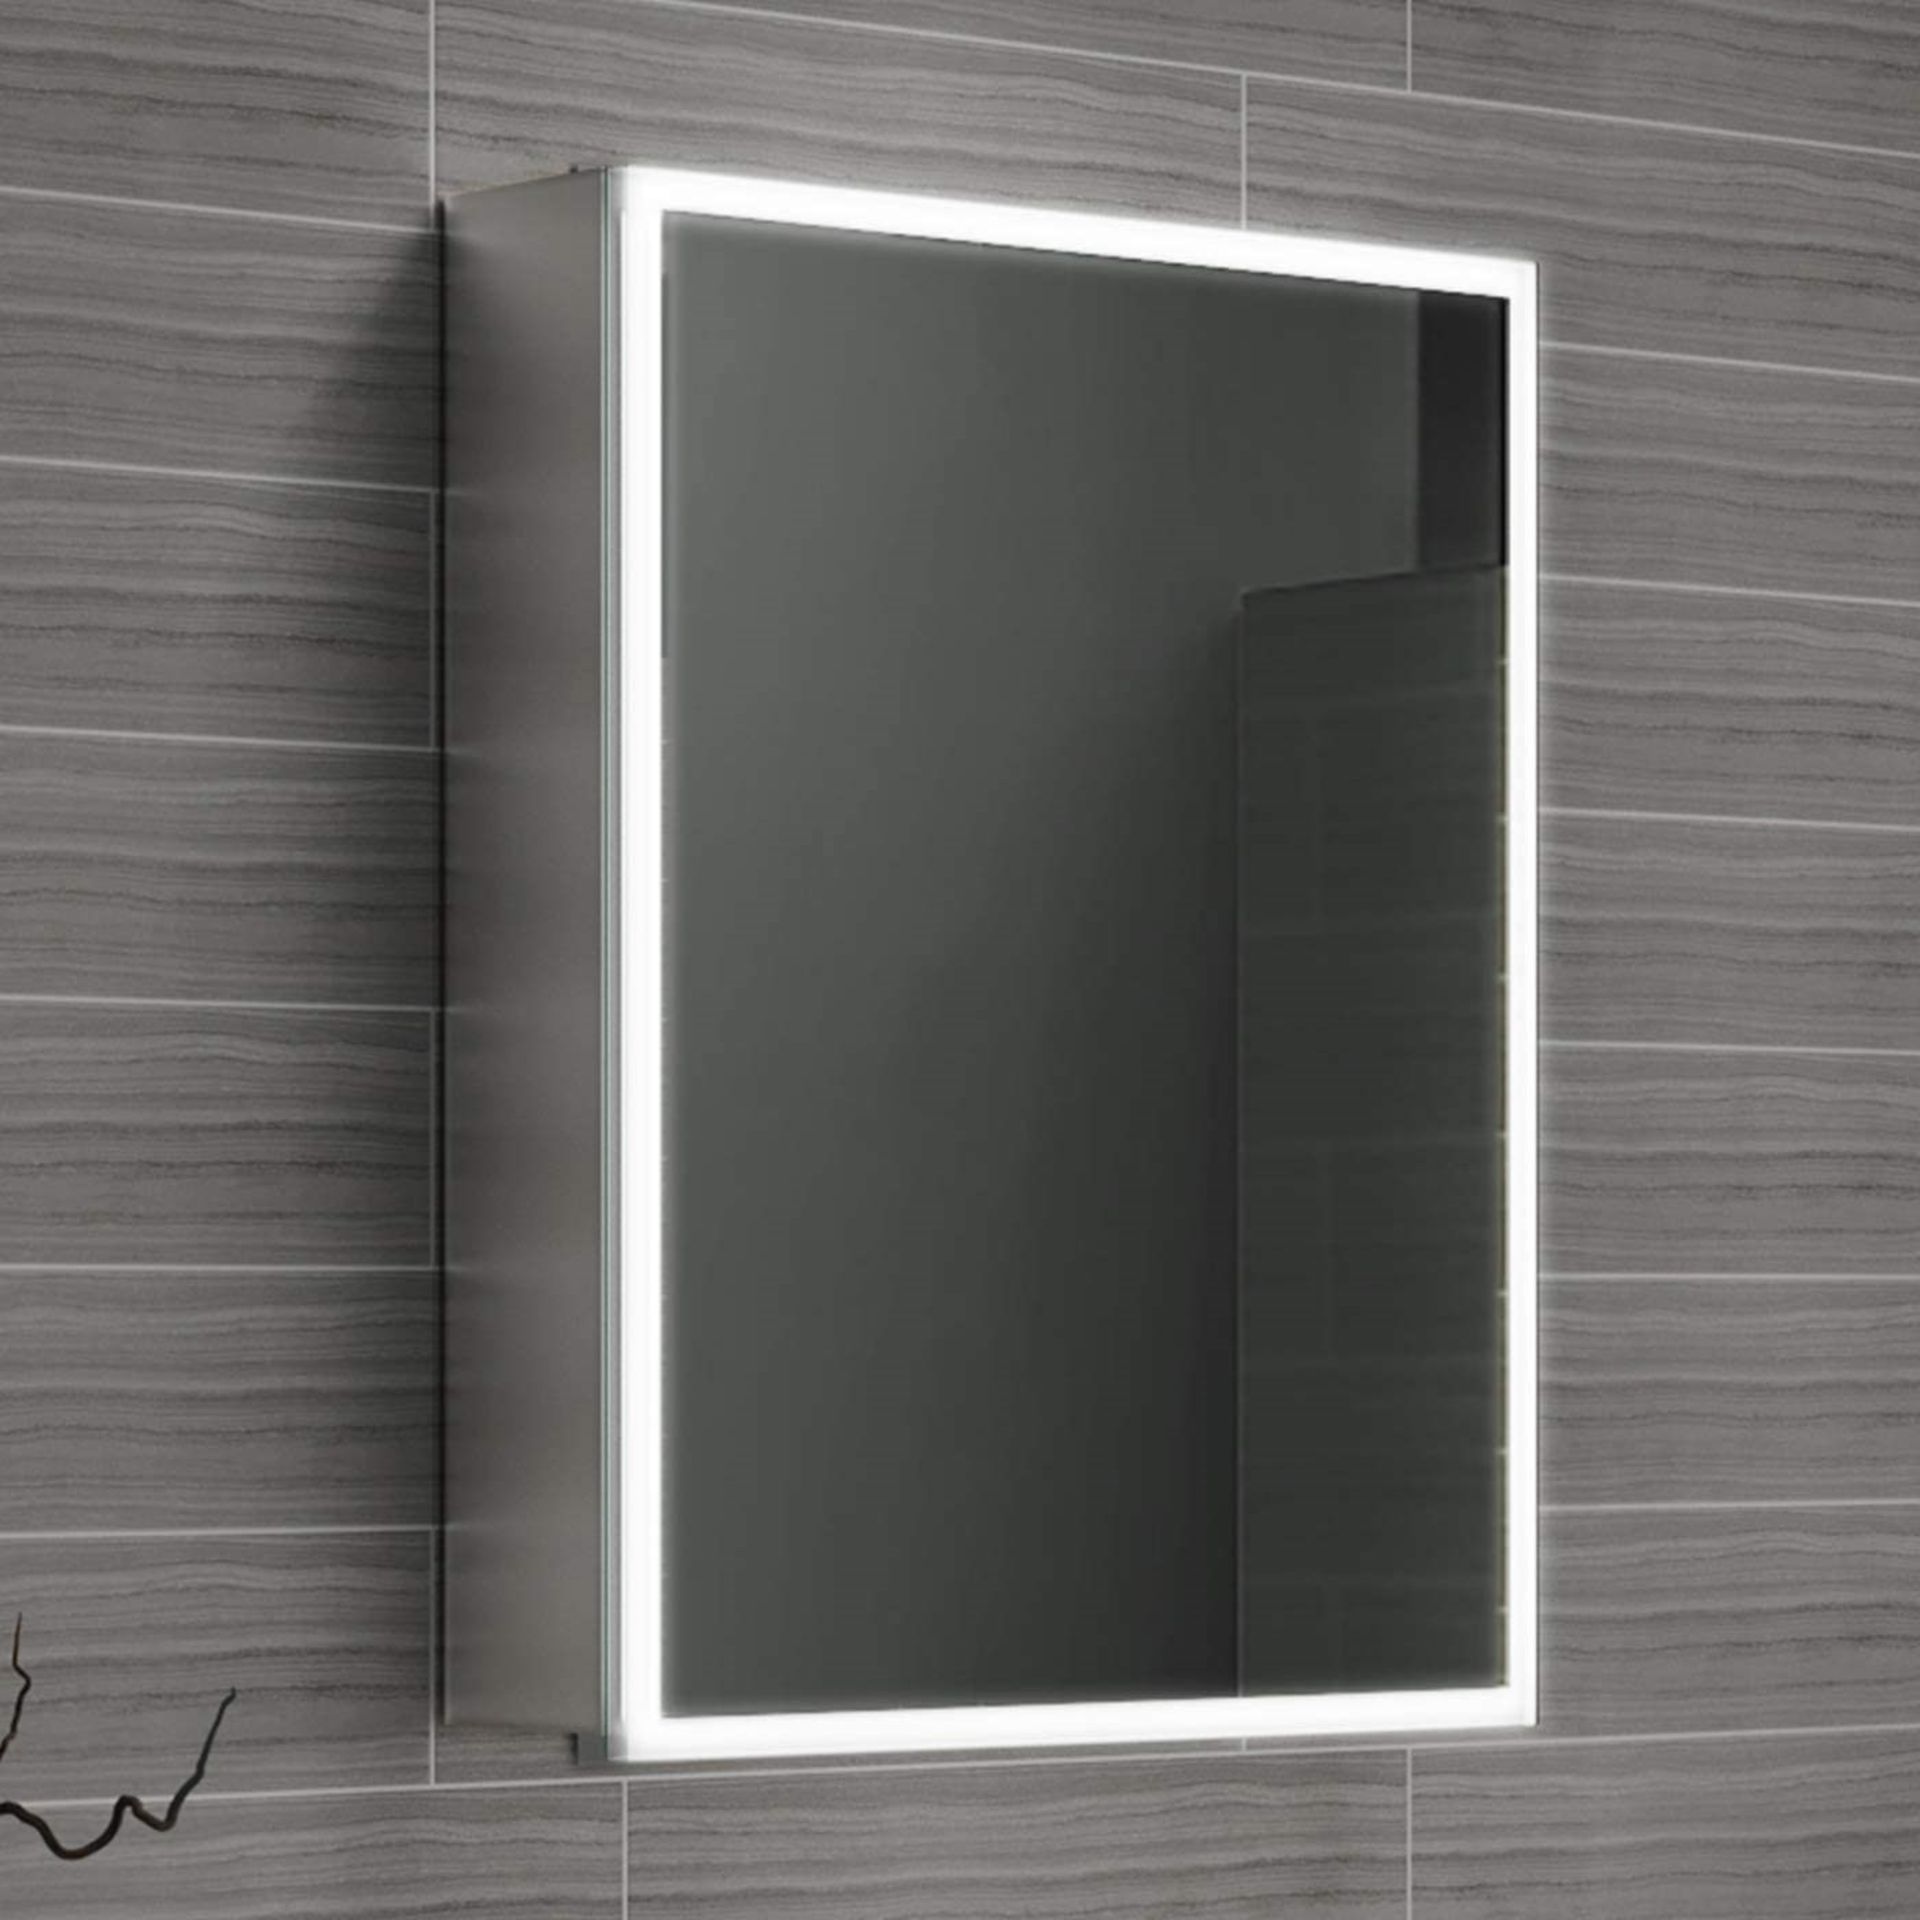 450x600 Cosmic Illuminated LED Mirror Cabinet. RRP £399.99.MC161.We love this mirror cabinet a...